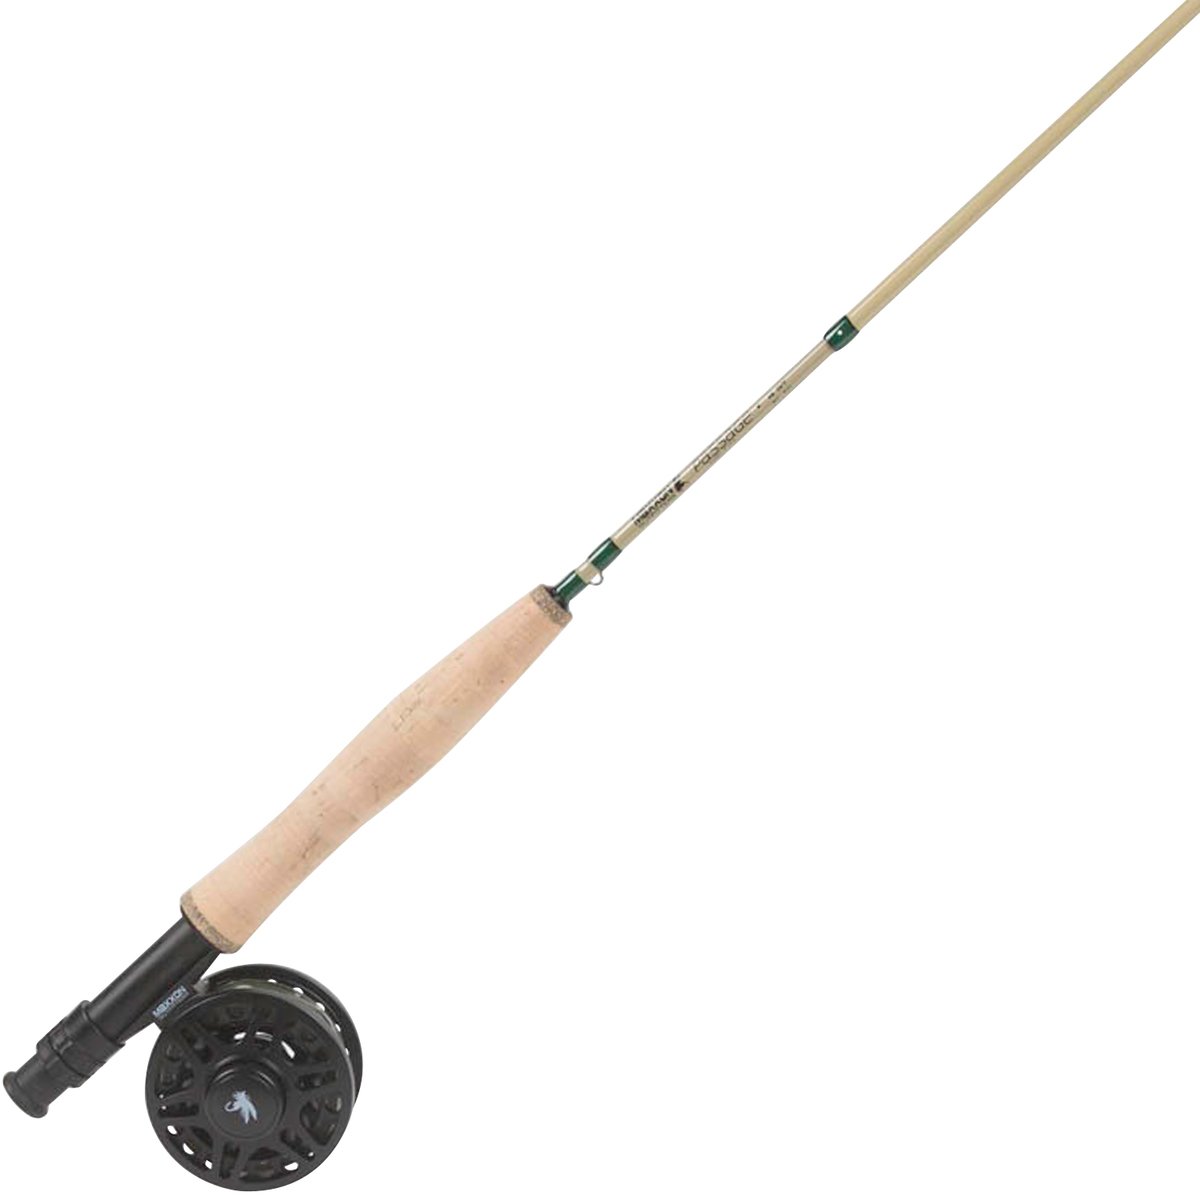 Maxxon Passage Outfit Fly Fishing Rod and Reel Combo - 8ft, 4wt